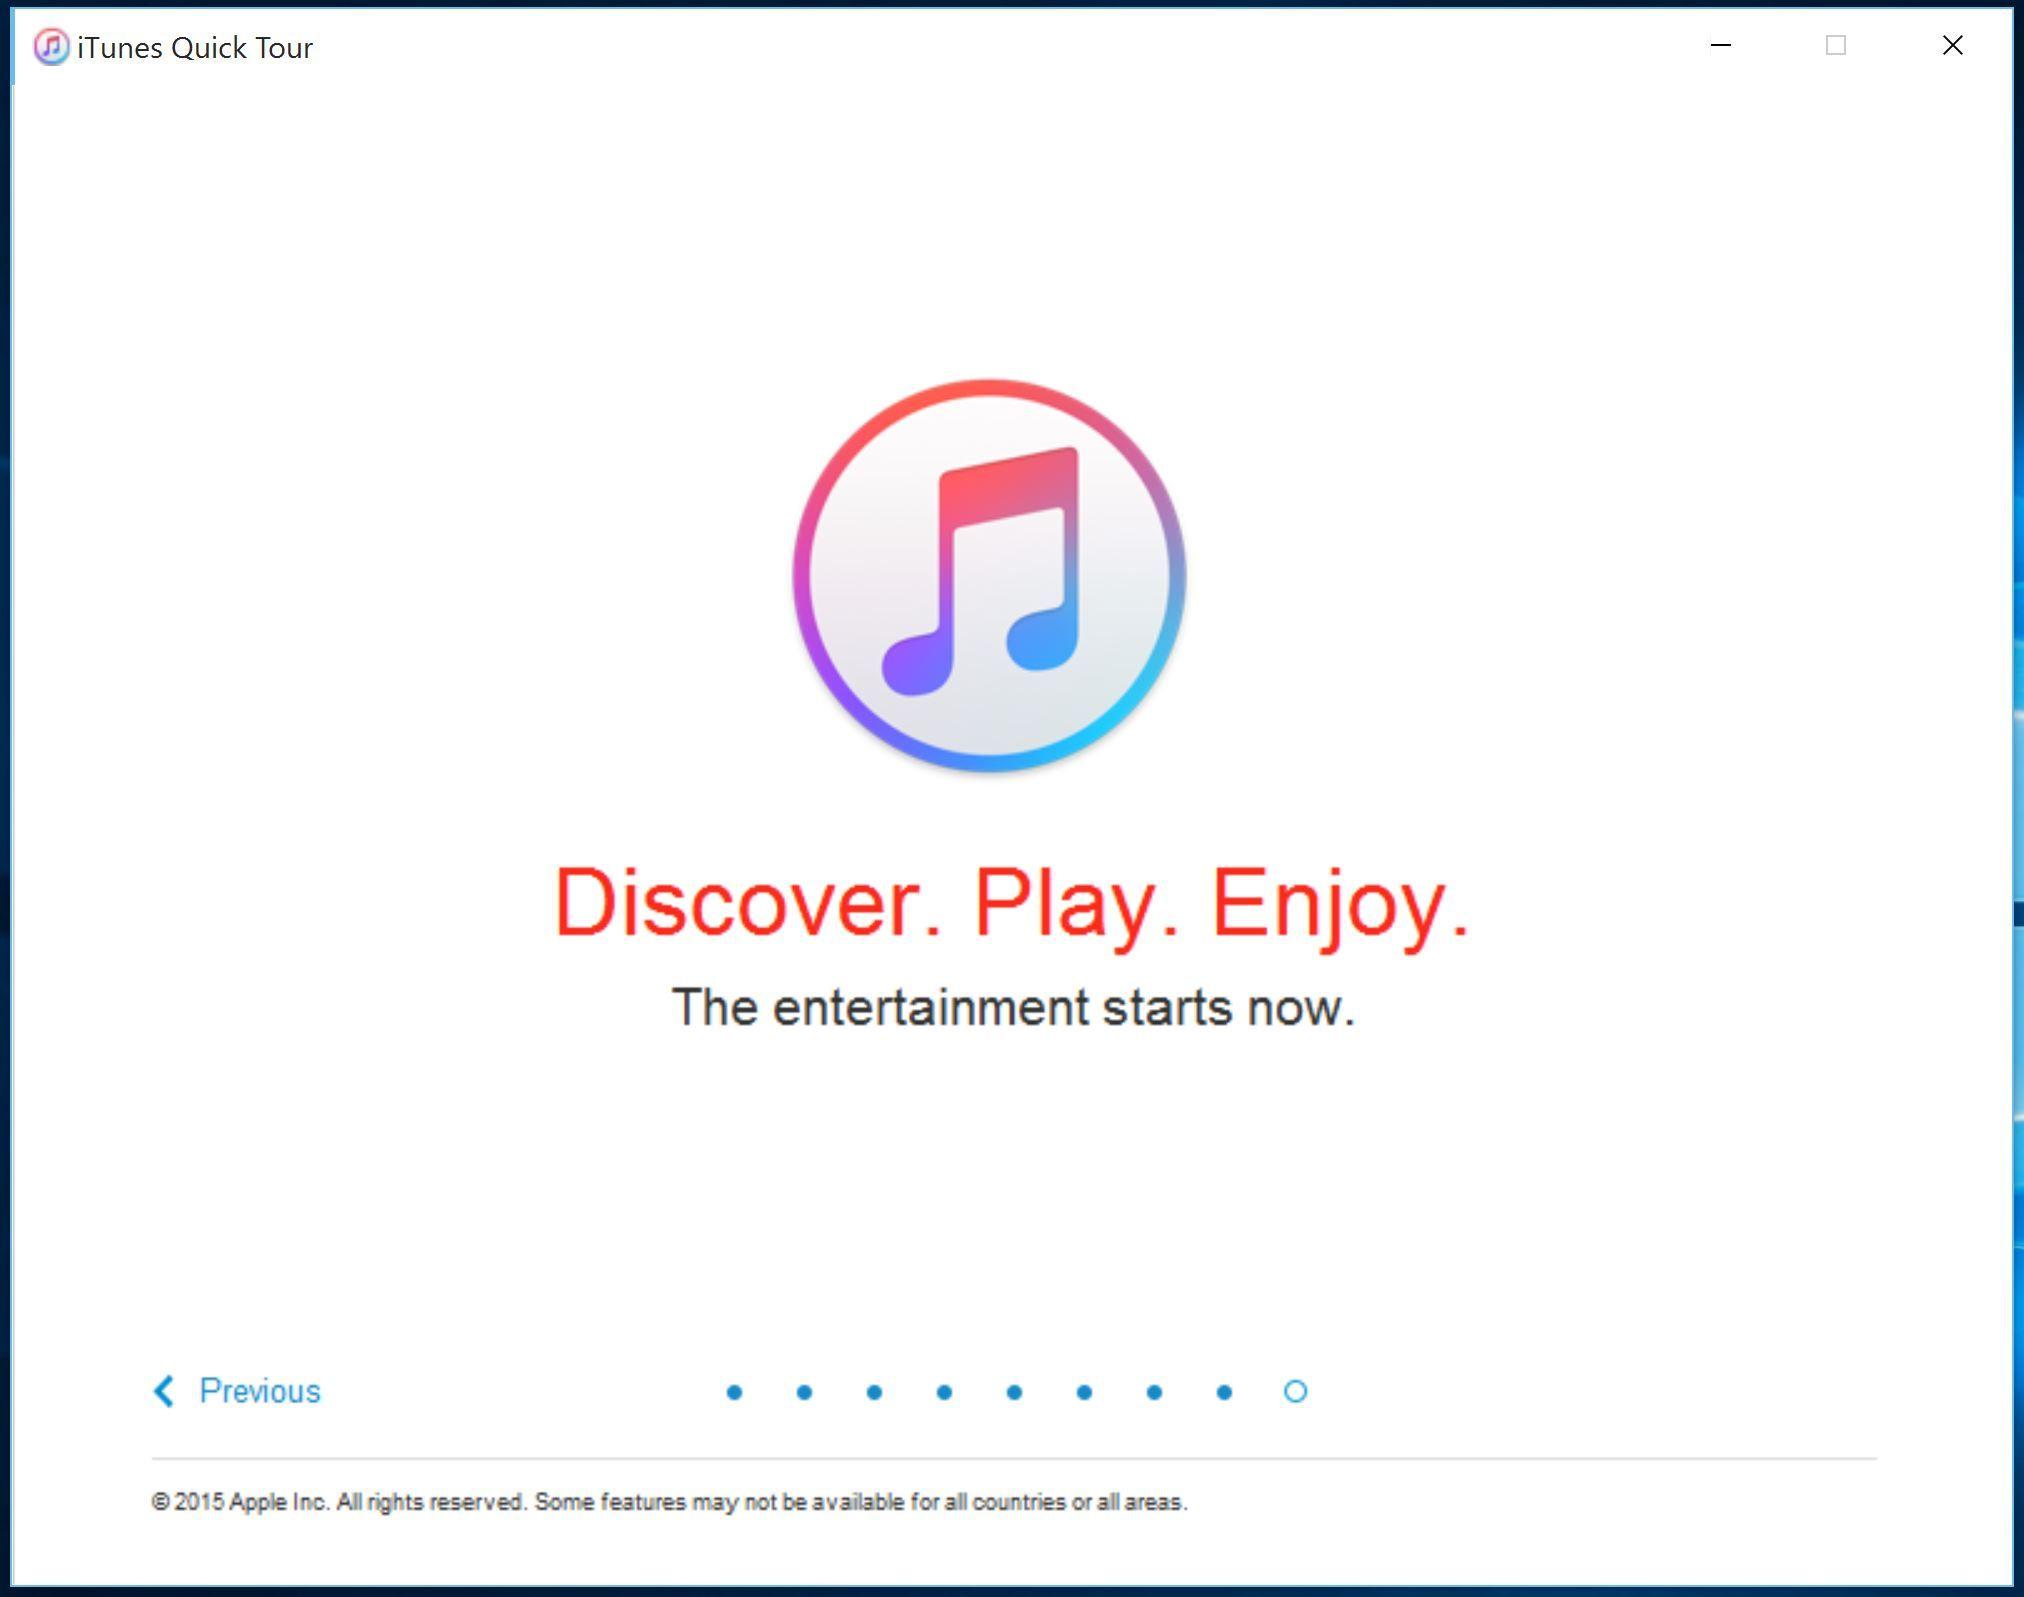 iTunes Windows 8 Logo - Take A Look At The New iTunes 12.2 For Windows From Apple - MSPoweruser